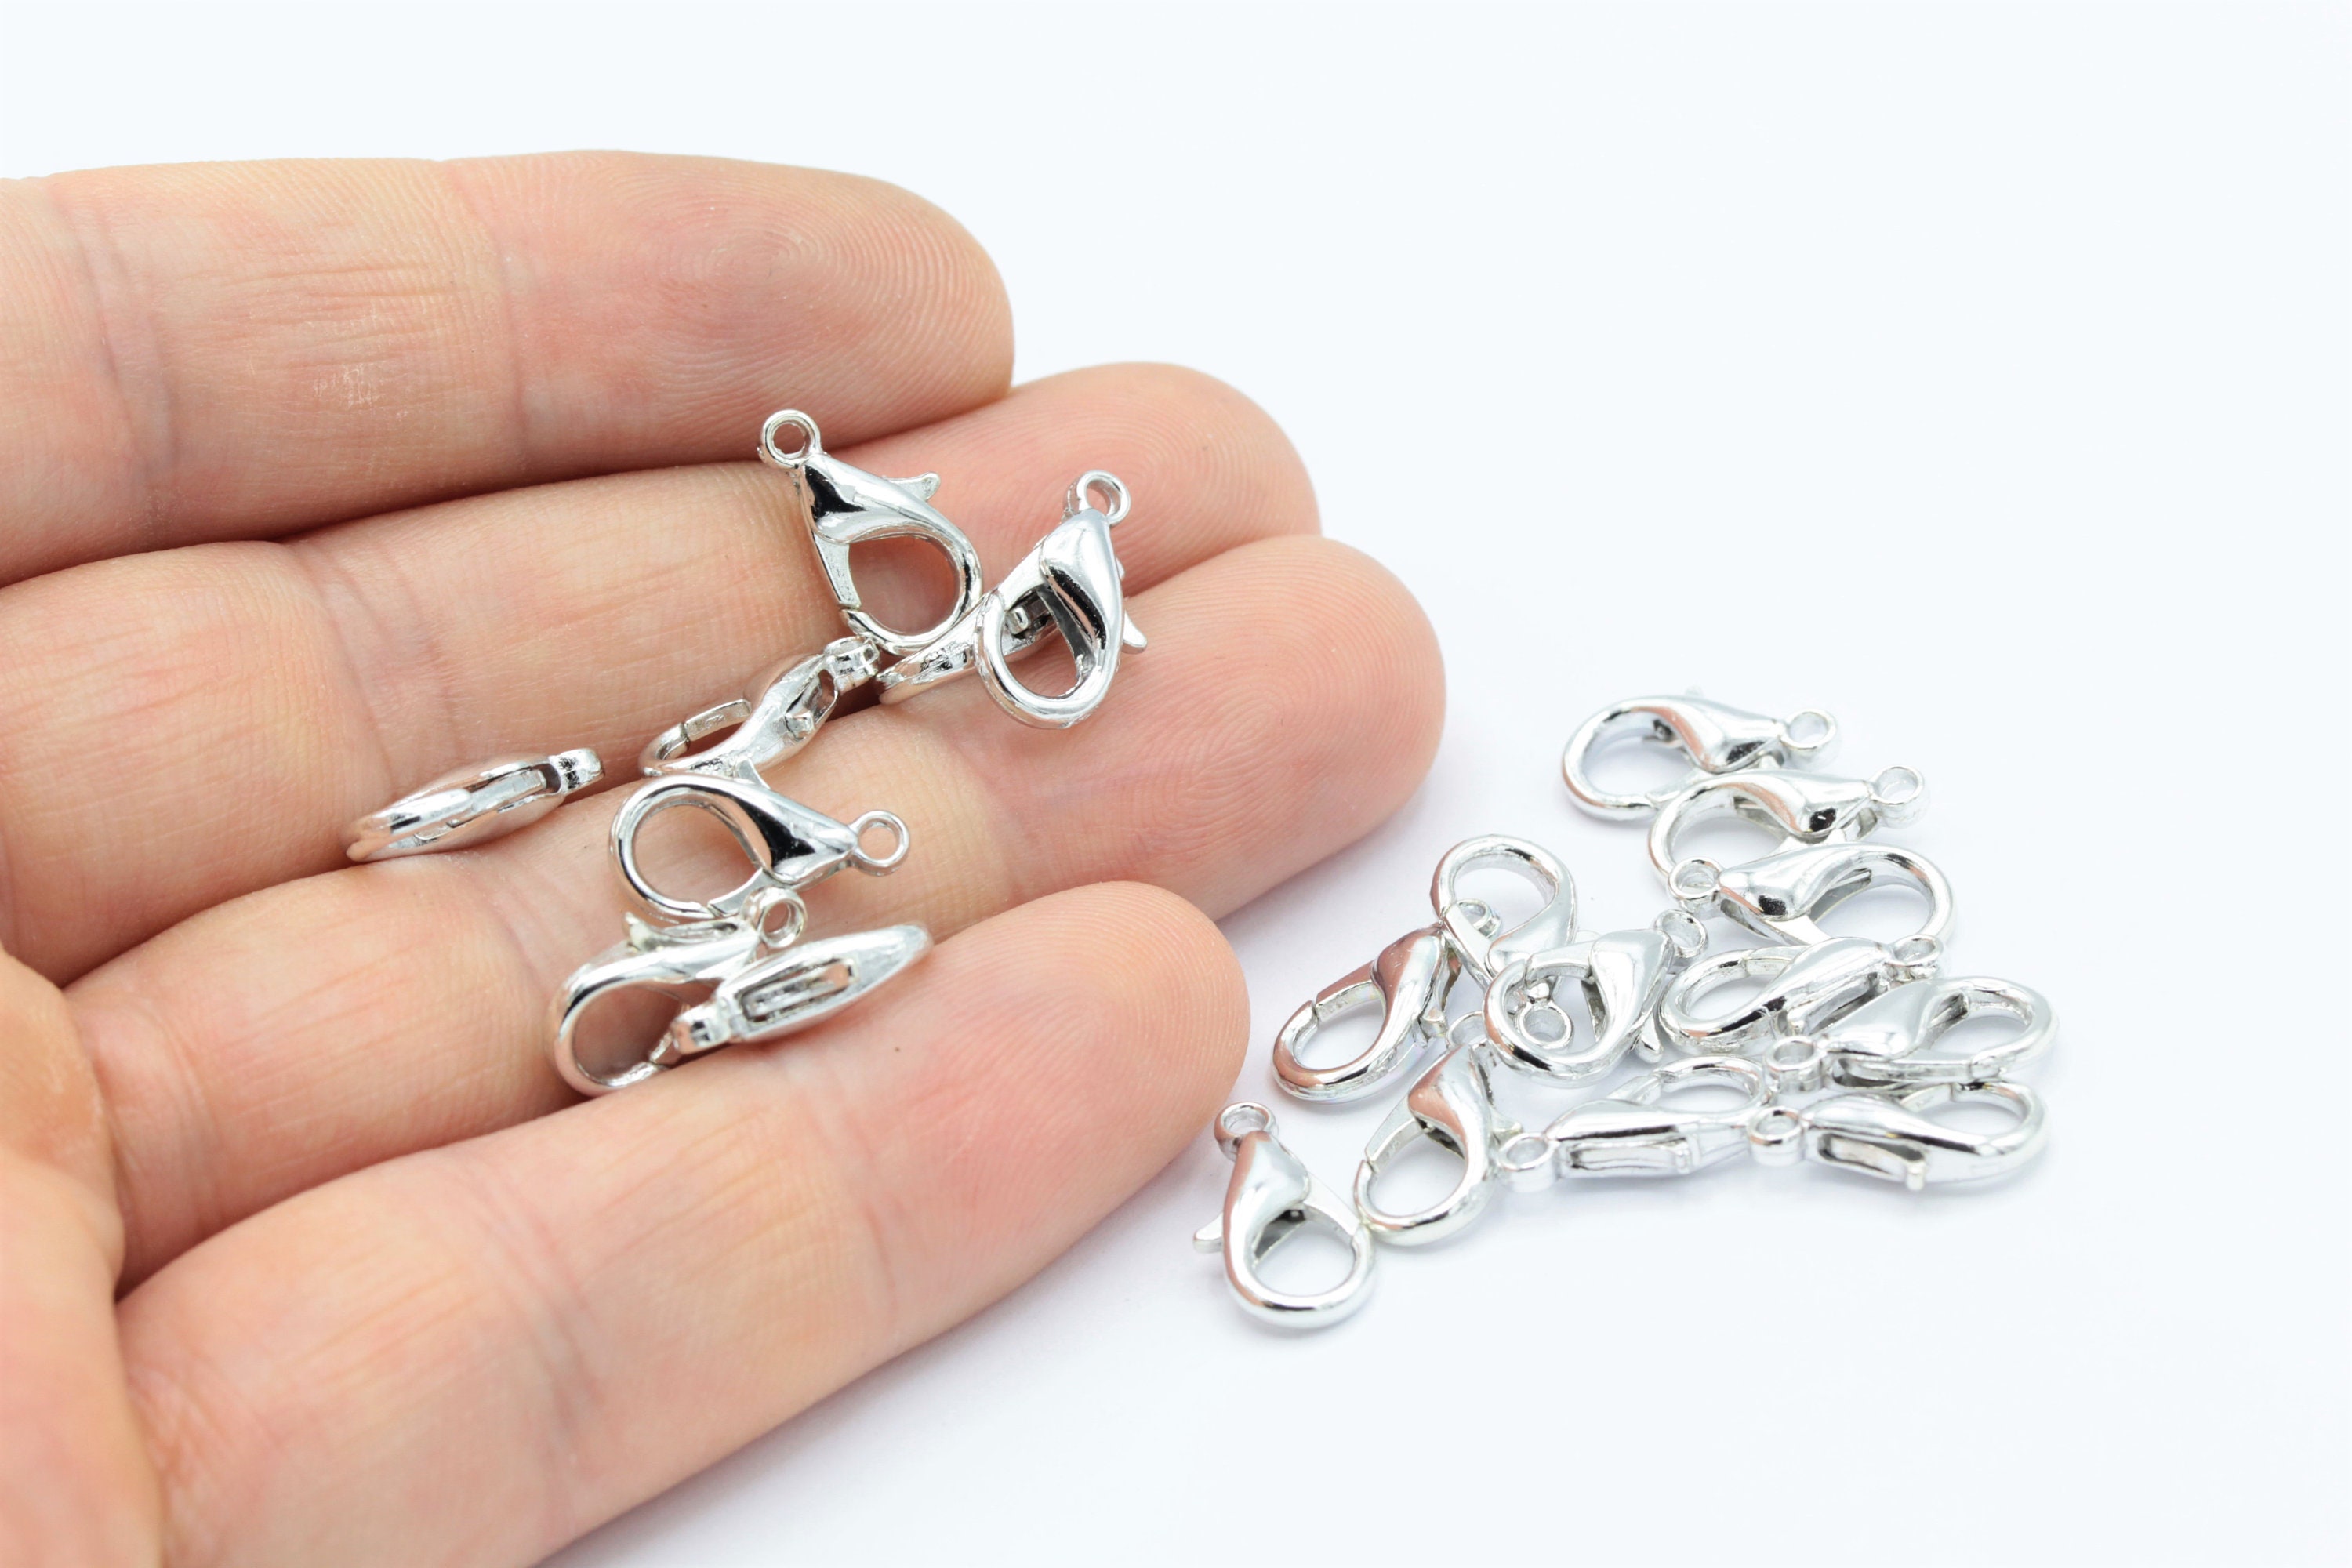 5pc, Silver Necklace Clasps, Hook Clasps, Bracelet Findings, Silver Plated  Toggle, Fish Hook Clasp, Nautical Bracelet, Jewelry Findings 